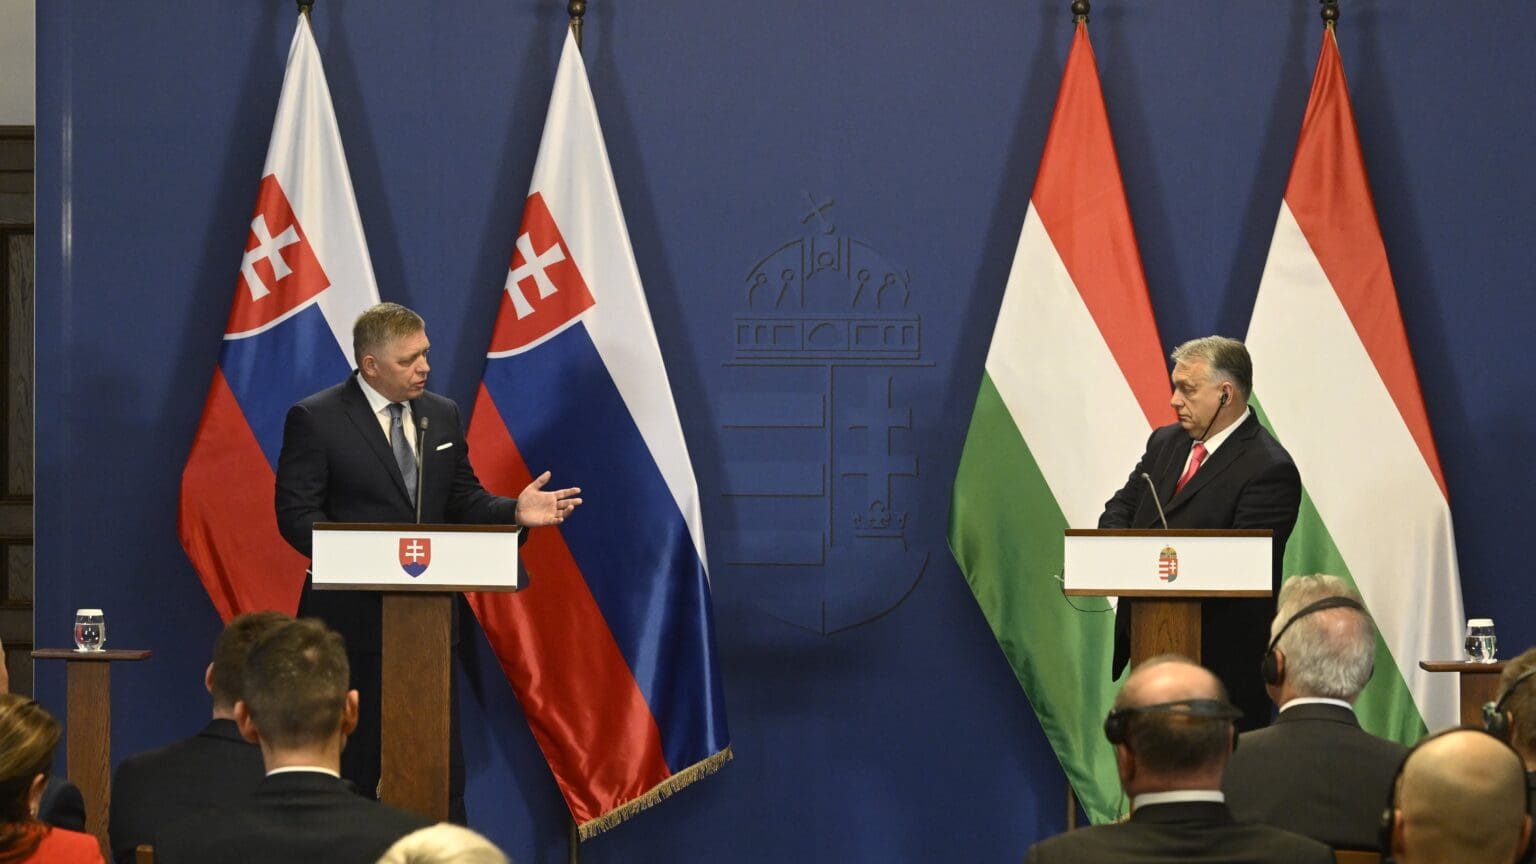 Robert Fico Voices Support for Viktor Orbán’s Position on Funding for Ukraine